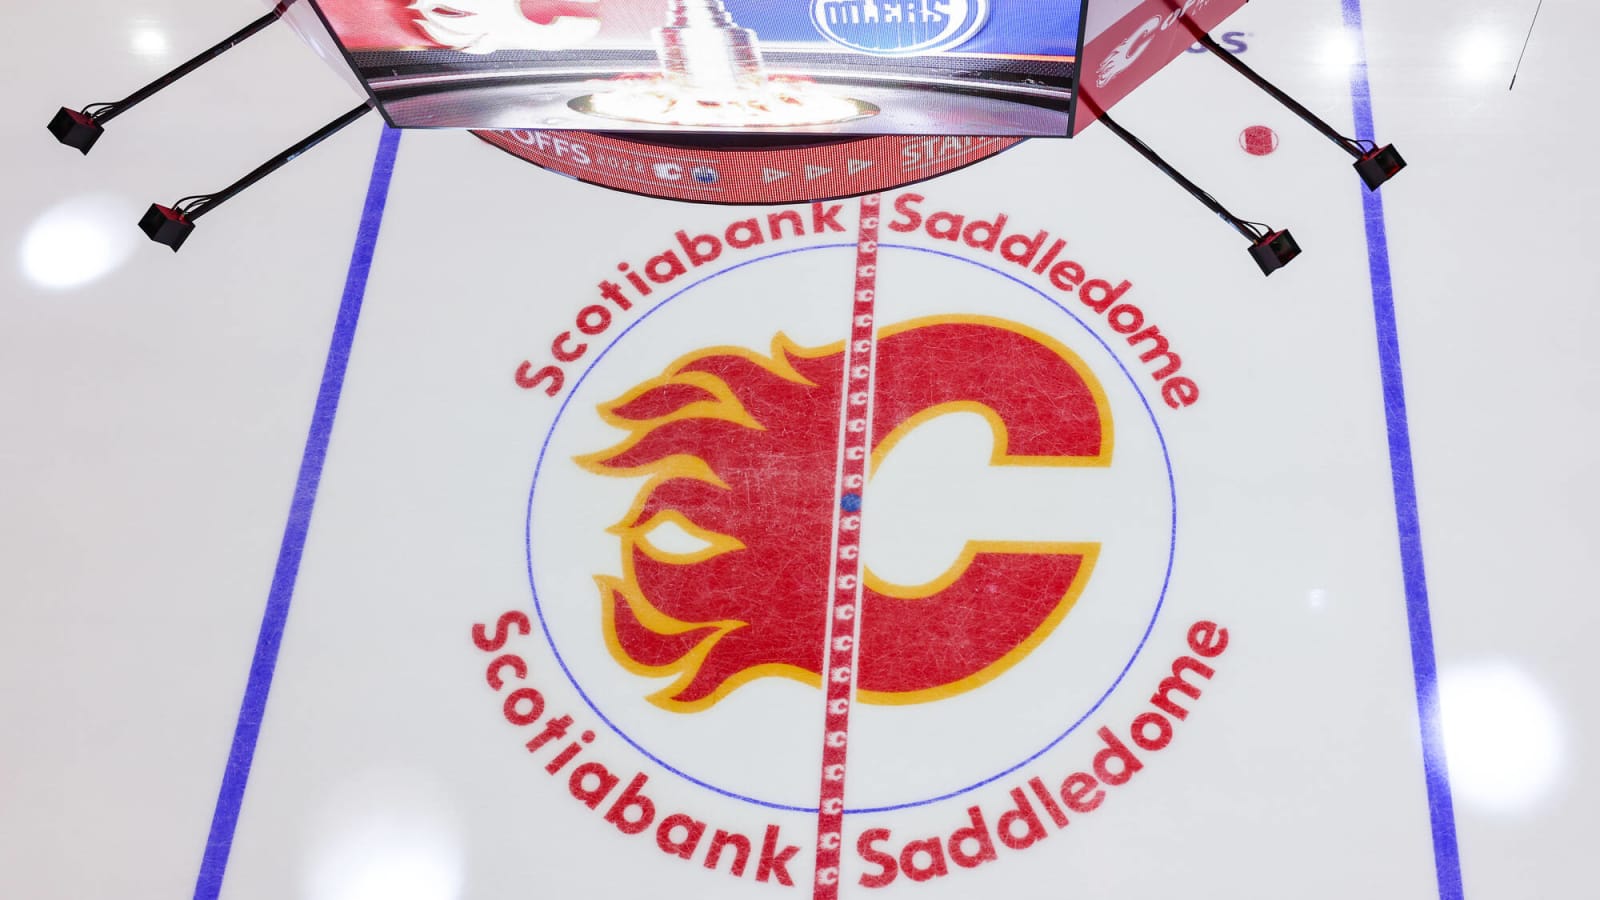 What’s happening with the Calgary Flames’ new arena?